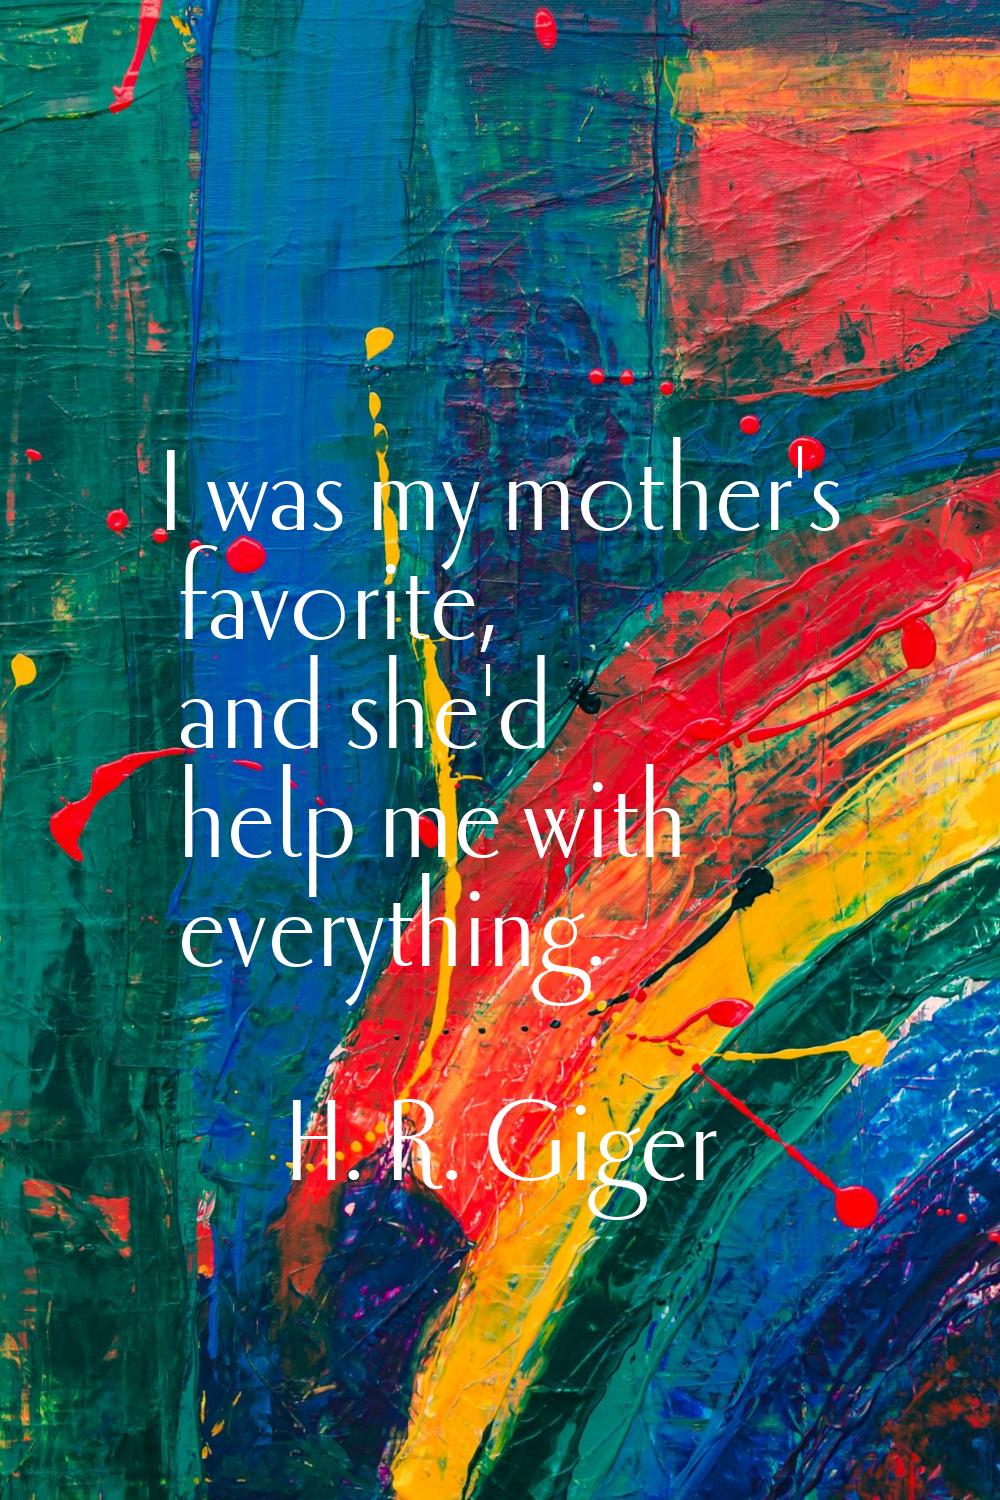 I was my mother's favorite, and she'd help me with everything.